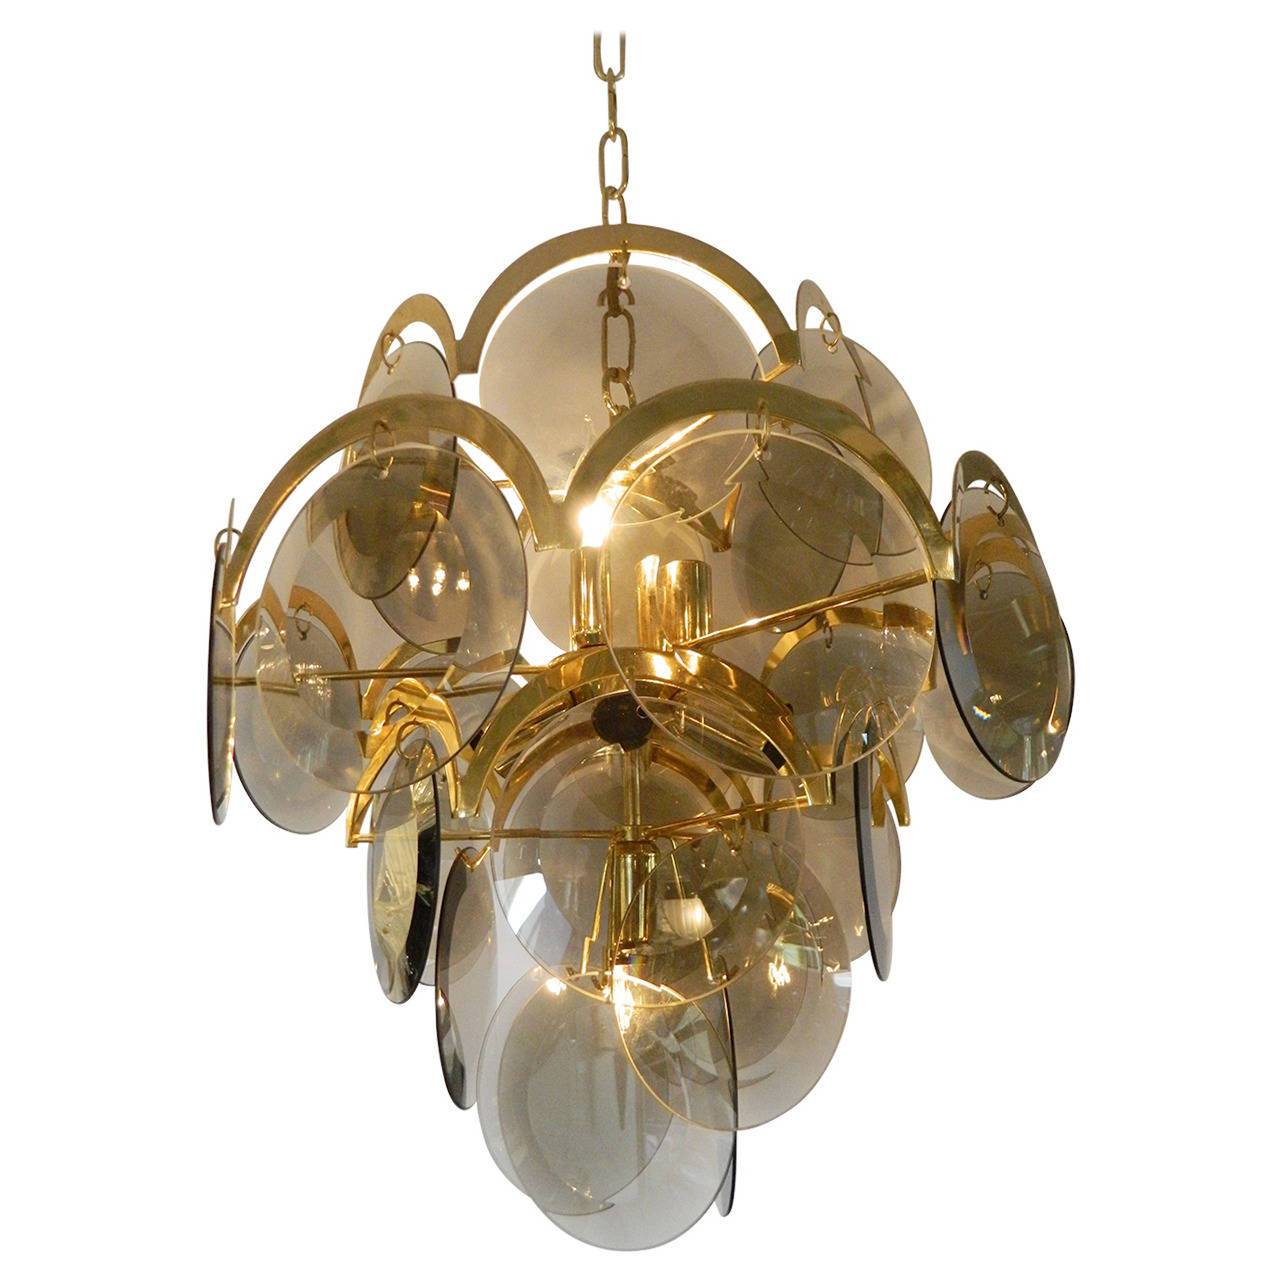 Spectacular 1970s Lightolier smoked beveled glass and brass 27 Disc and ten-light chandelier in the style of Gino Vistosi for Murano by Lightolier. The light reflects nicely off the beveled glass. Measures: 18